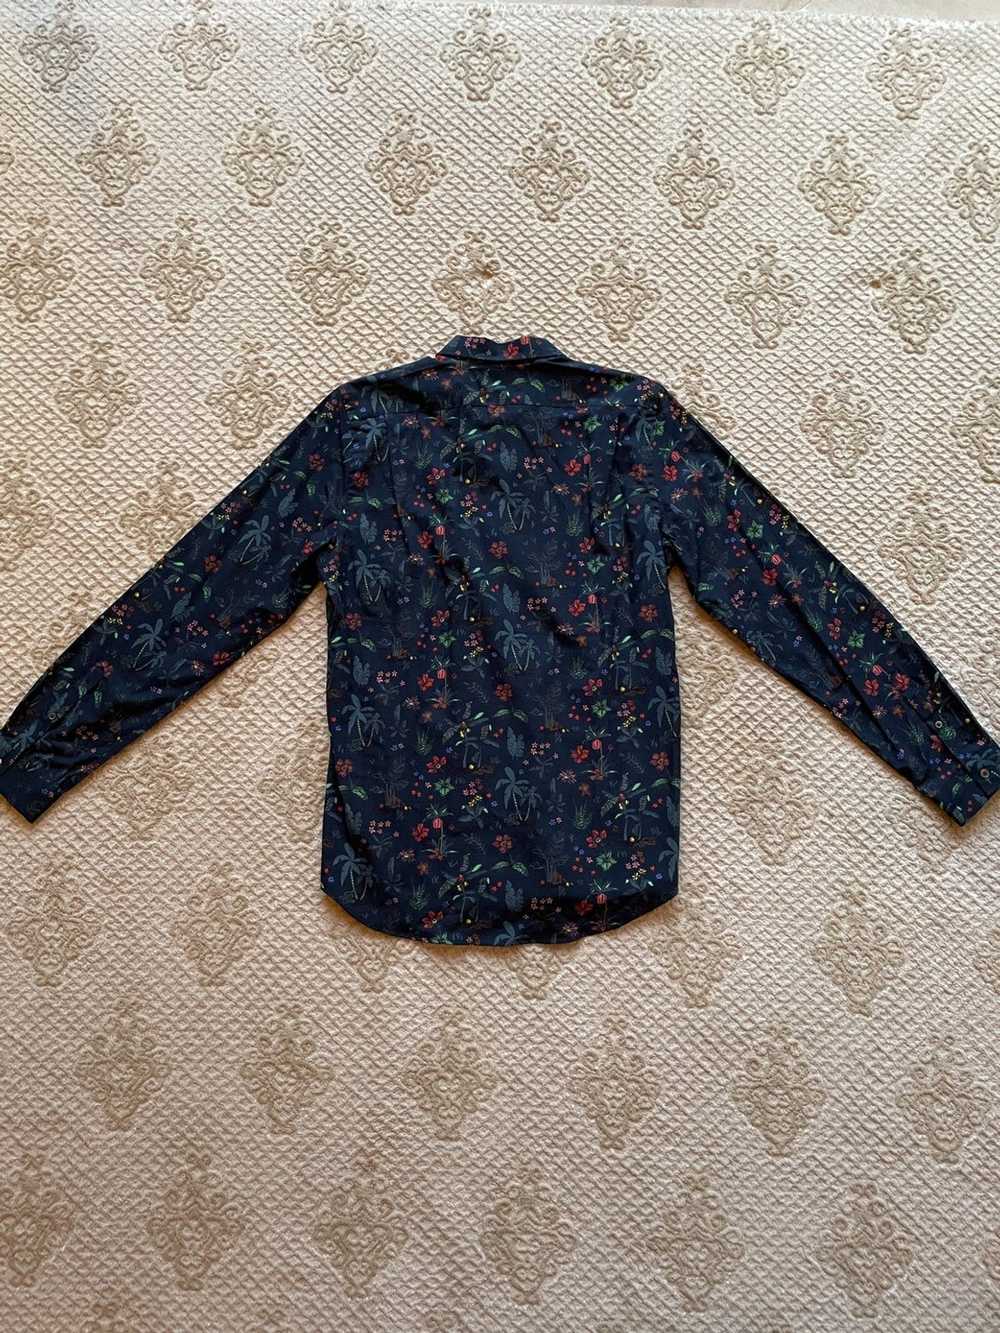 Paul Smith Navy Floral Shirt - image 2